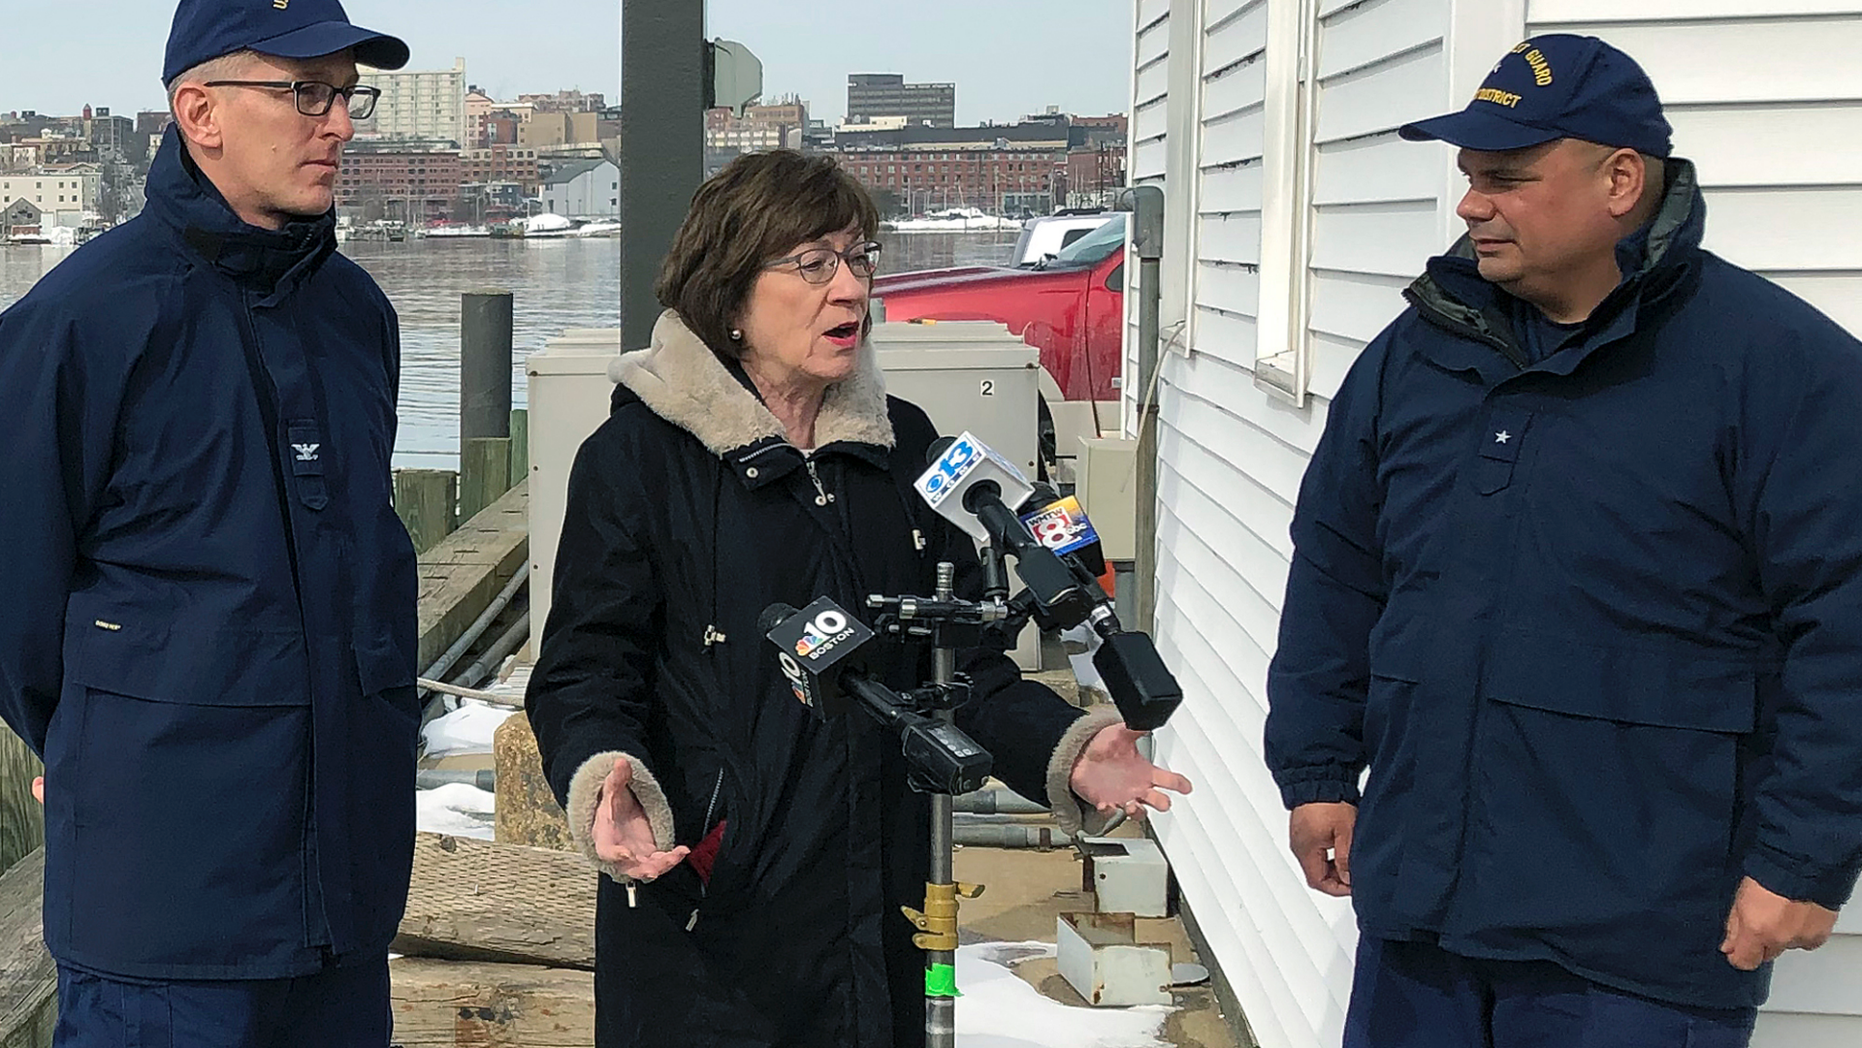 US Senator Susan Collins, R-Maine, is accompanied by Coast Guard Captain Brian LeFebvre, left, and Rear-Admiral Andrew Tiongson, right, while she addresses reporters after the ribbon cutting at a US Coast Guard Regional Command Center Wednesday, February 20, 2019, South Portland, Maine. Collins said she would vote for a congressional resolution disapproving of President Donald Trump's emergency declaration to build a wall on the southern border. She is the first Republican senator to publicly express her support for such a resolution. (AP Photo / David Sharp)